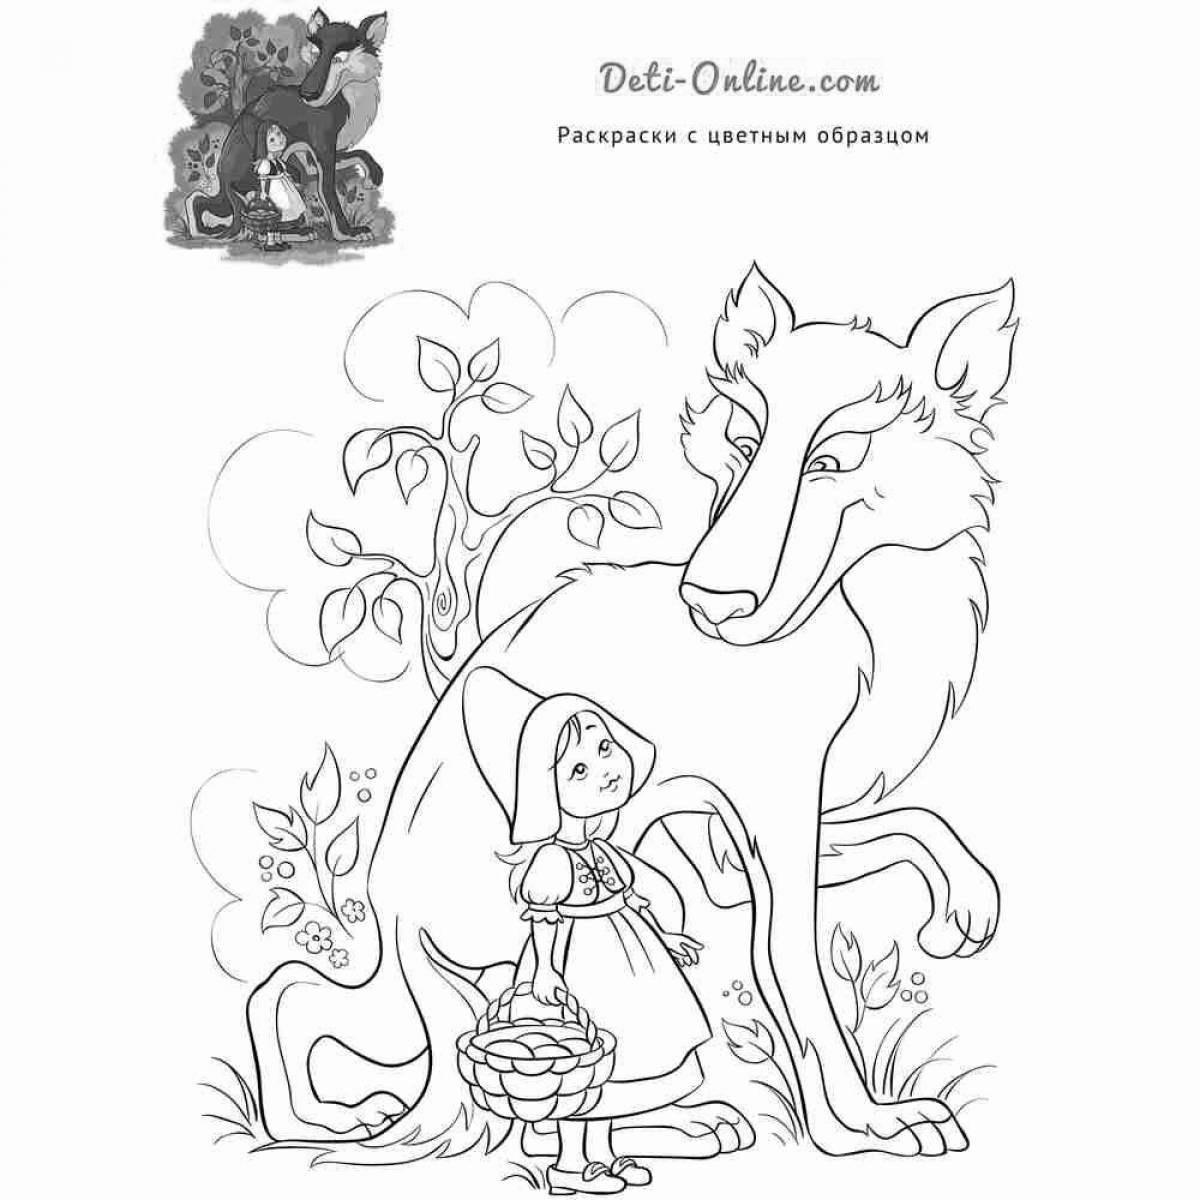 Rampant Little Red Riding Hood coloring book